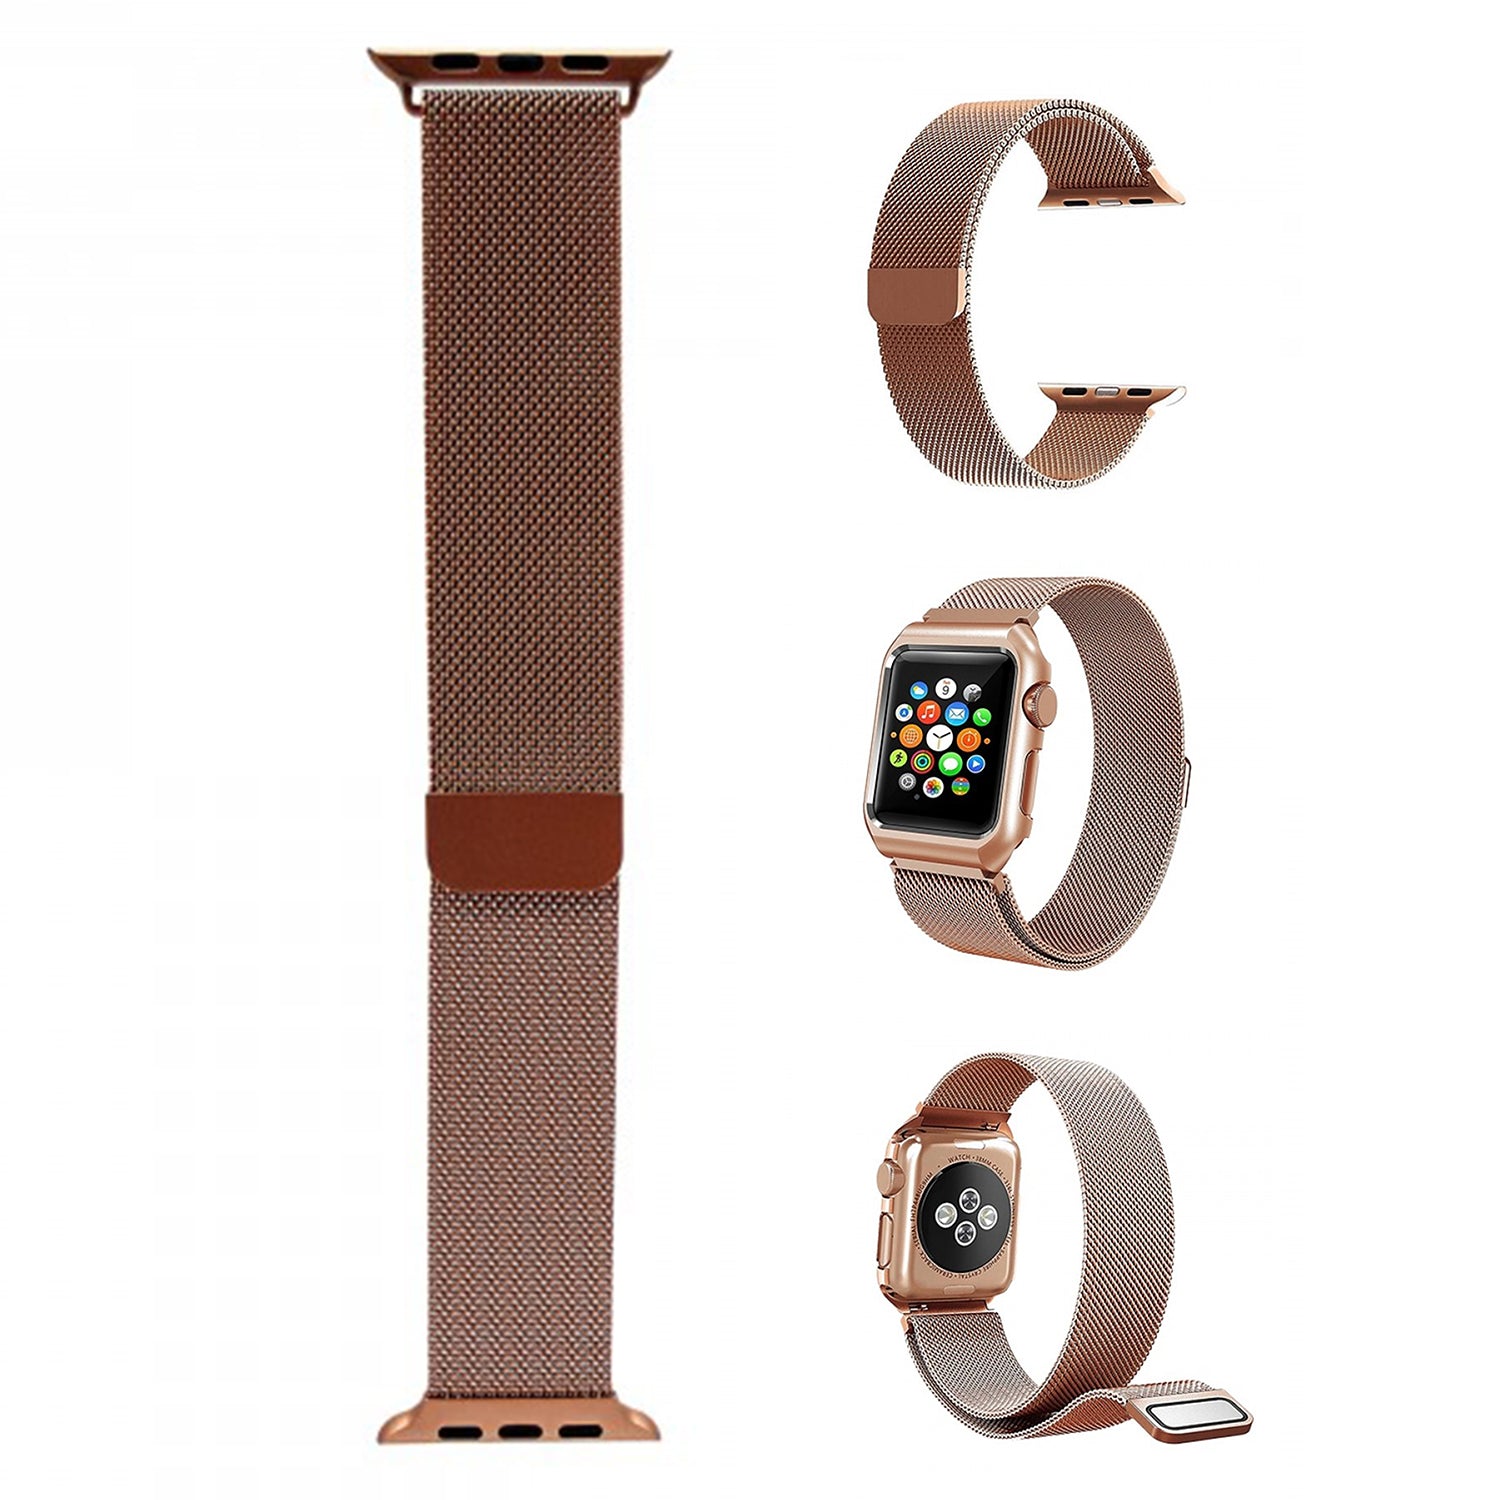 38mm Stainless Steel Wristband  for i-Watch Series 4/3/2/1  Milanese Loop with Strong Magnetic Closure Strap